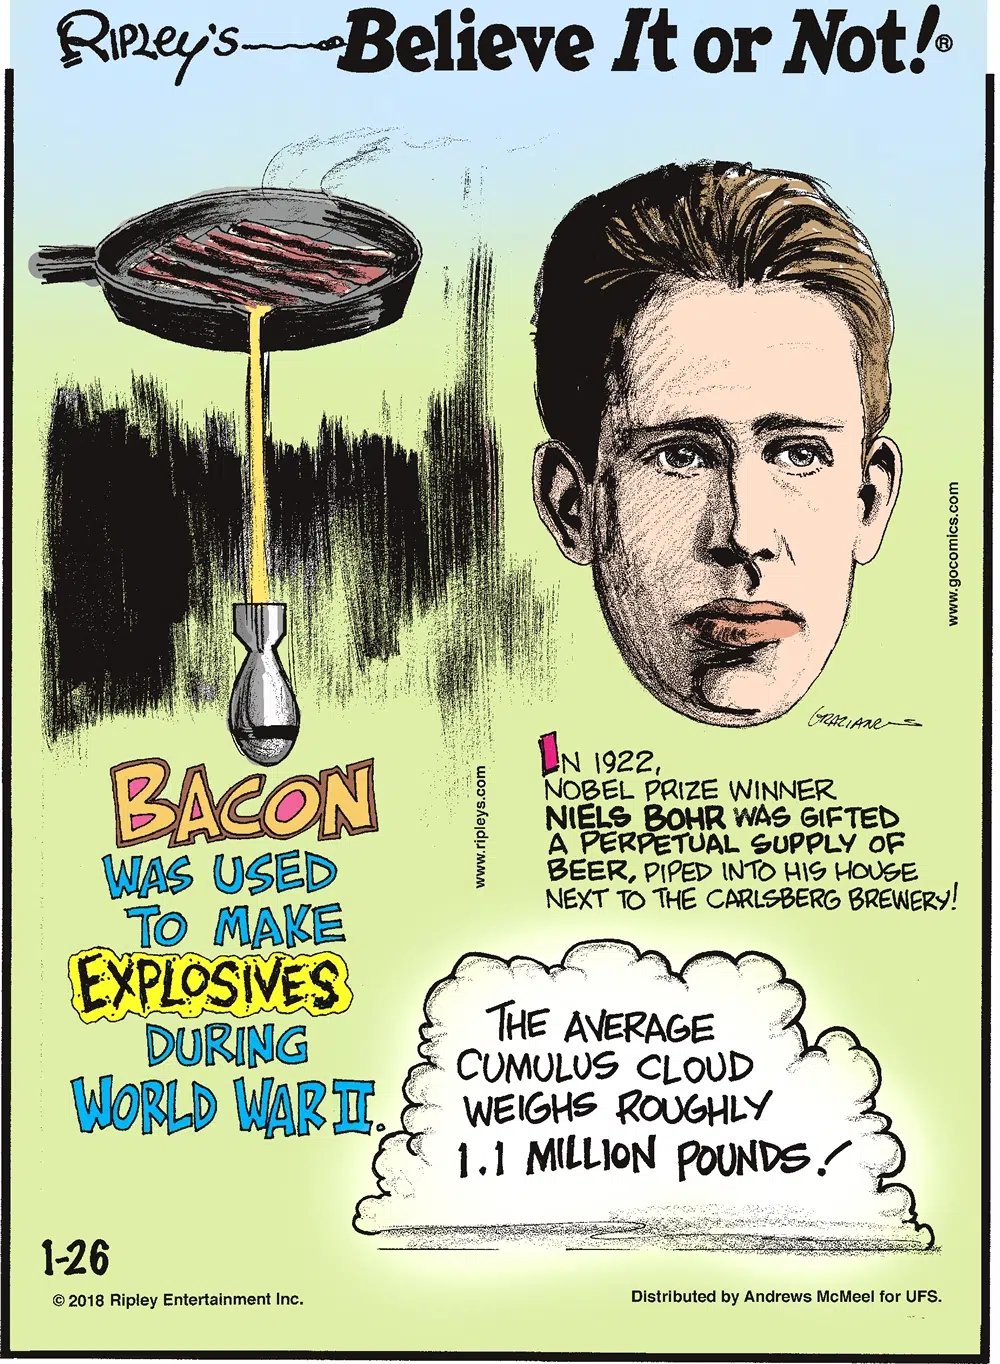 Bacon was used to make explosives during World War II.-------------------- In 1922, Nobel Prize Winner Niels Bohr was gifted a perpetual supply of beer, piped into his house next to the Carlsberg Brewery!-------------------- The average cumulus cloud weighs roughly 1.1 million pounds!